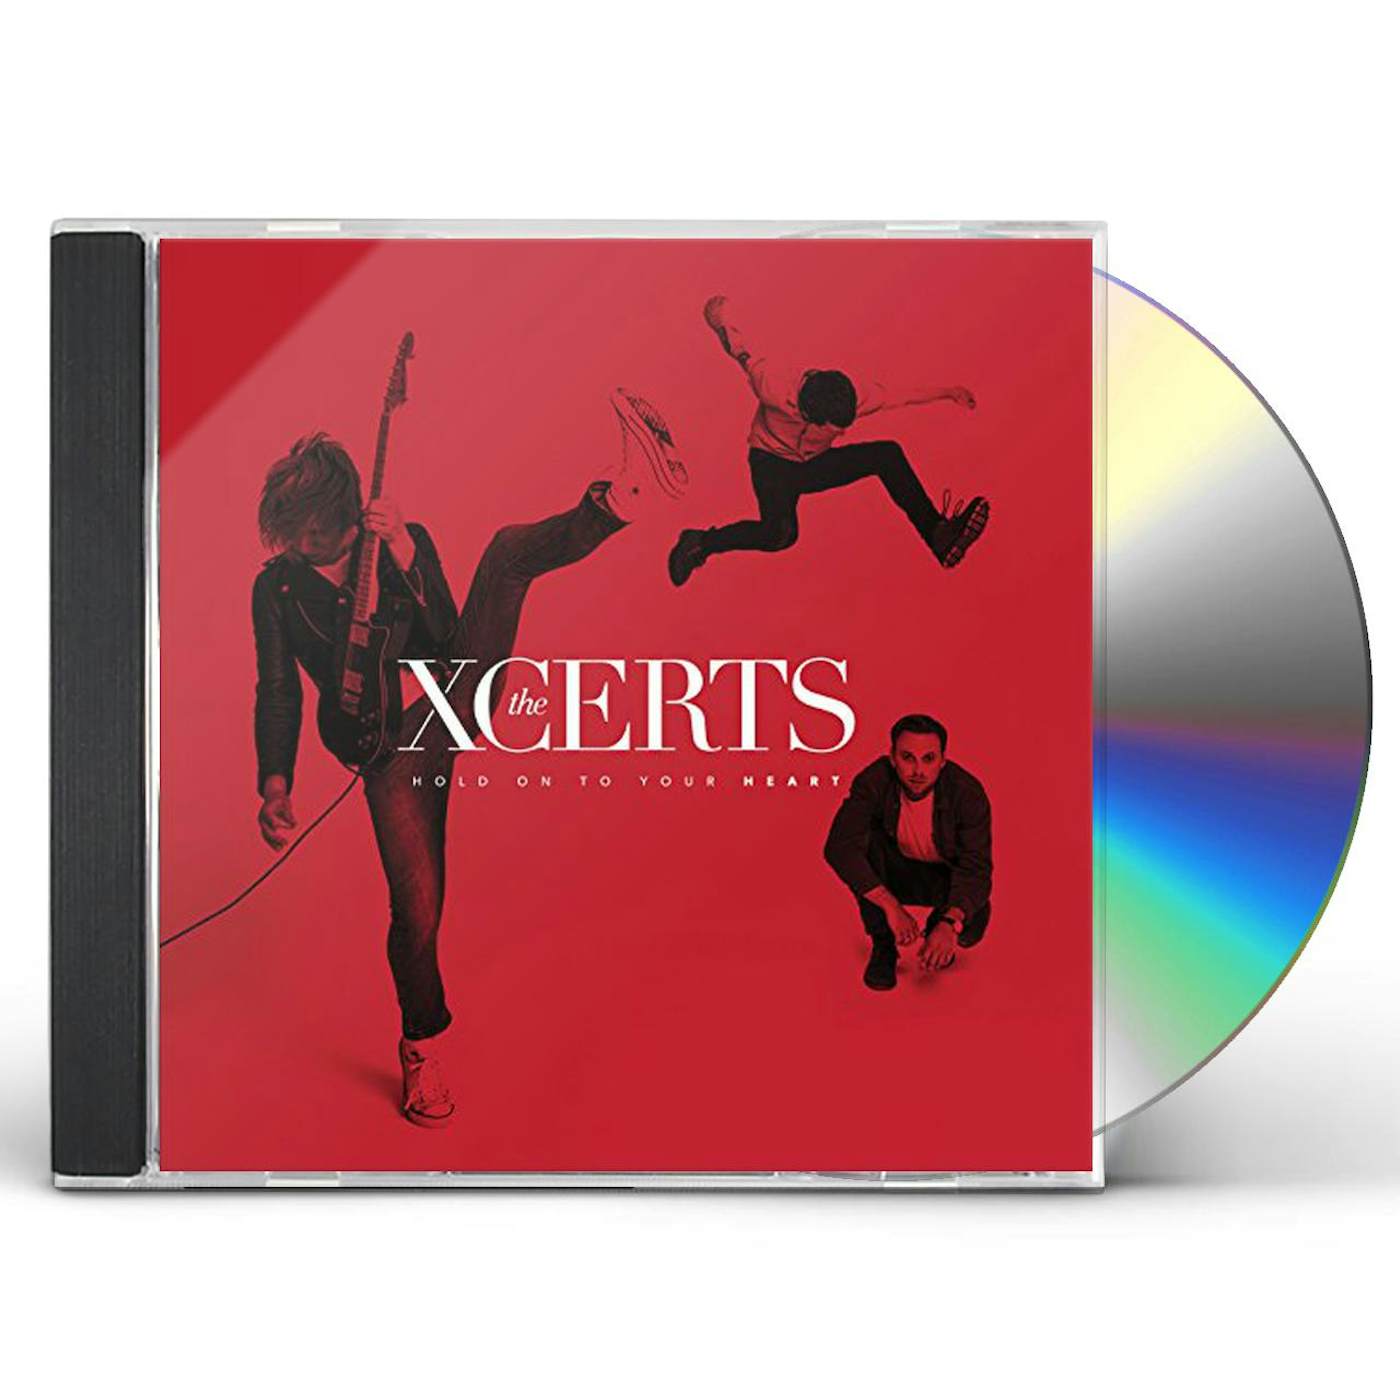 The XCERTS HOLD ON TO YOUR HEART CD